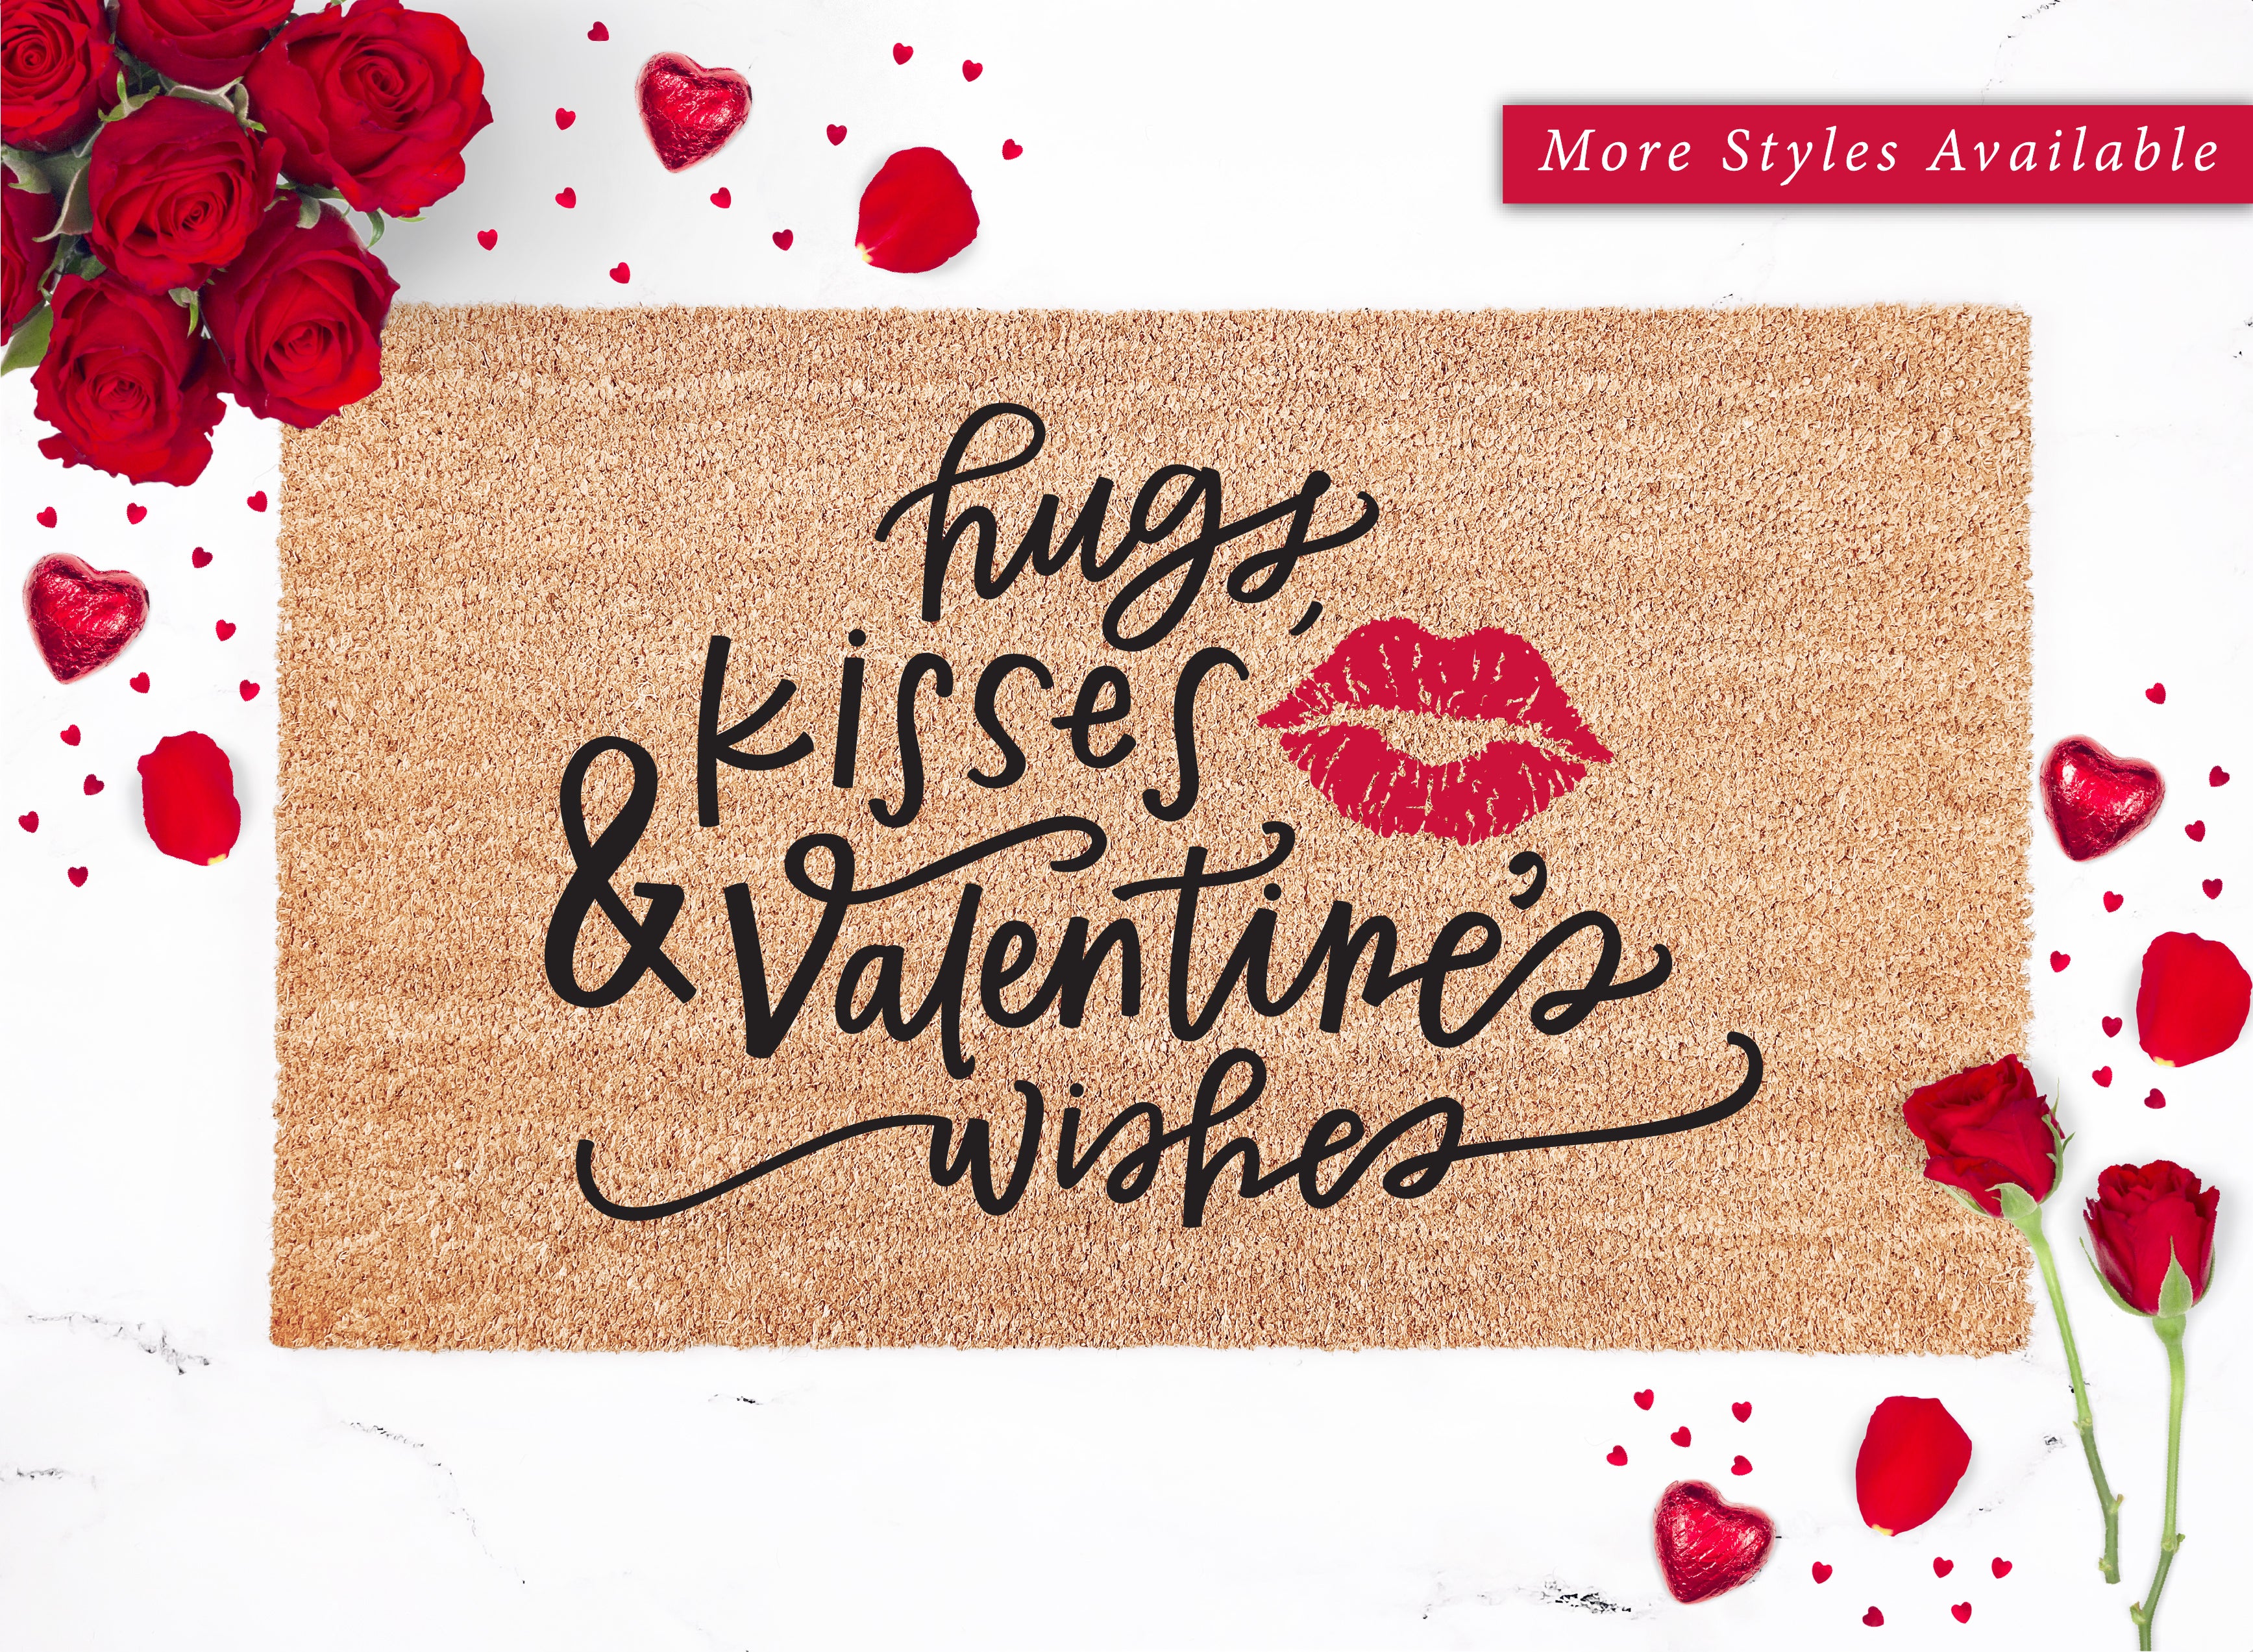 Hugs Kisses and Valentines Wishes Doormat